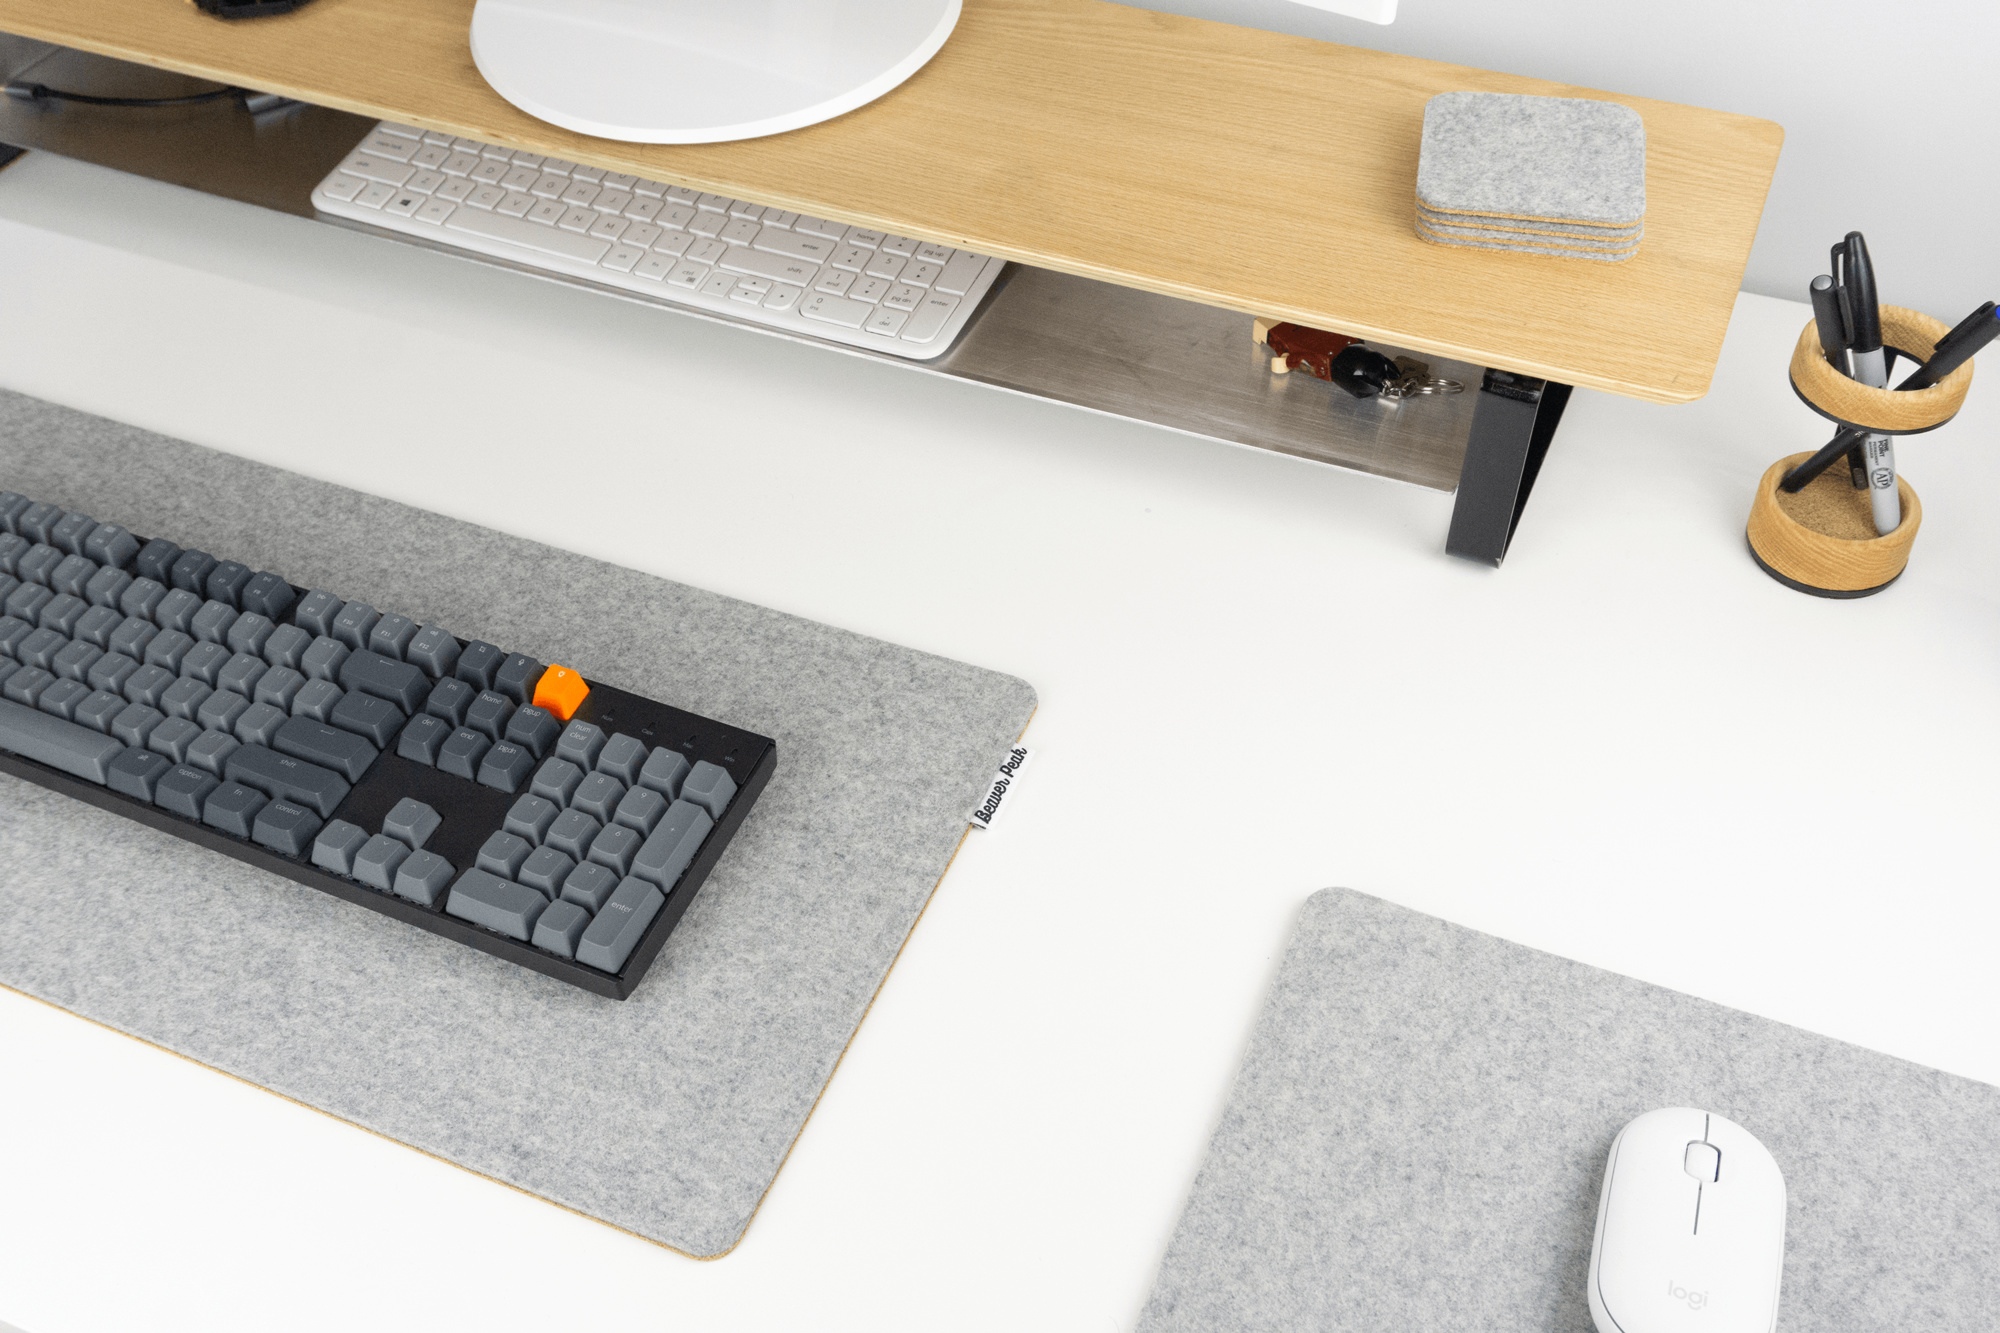 Grey wool mousepad next to matching grey desk mat. Desk also includes pen stand and desk shelf